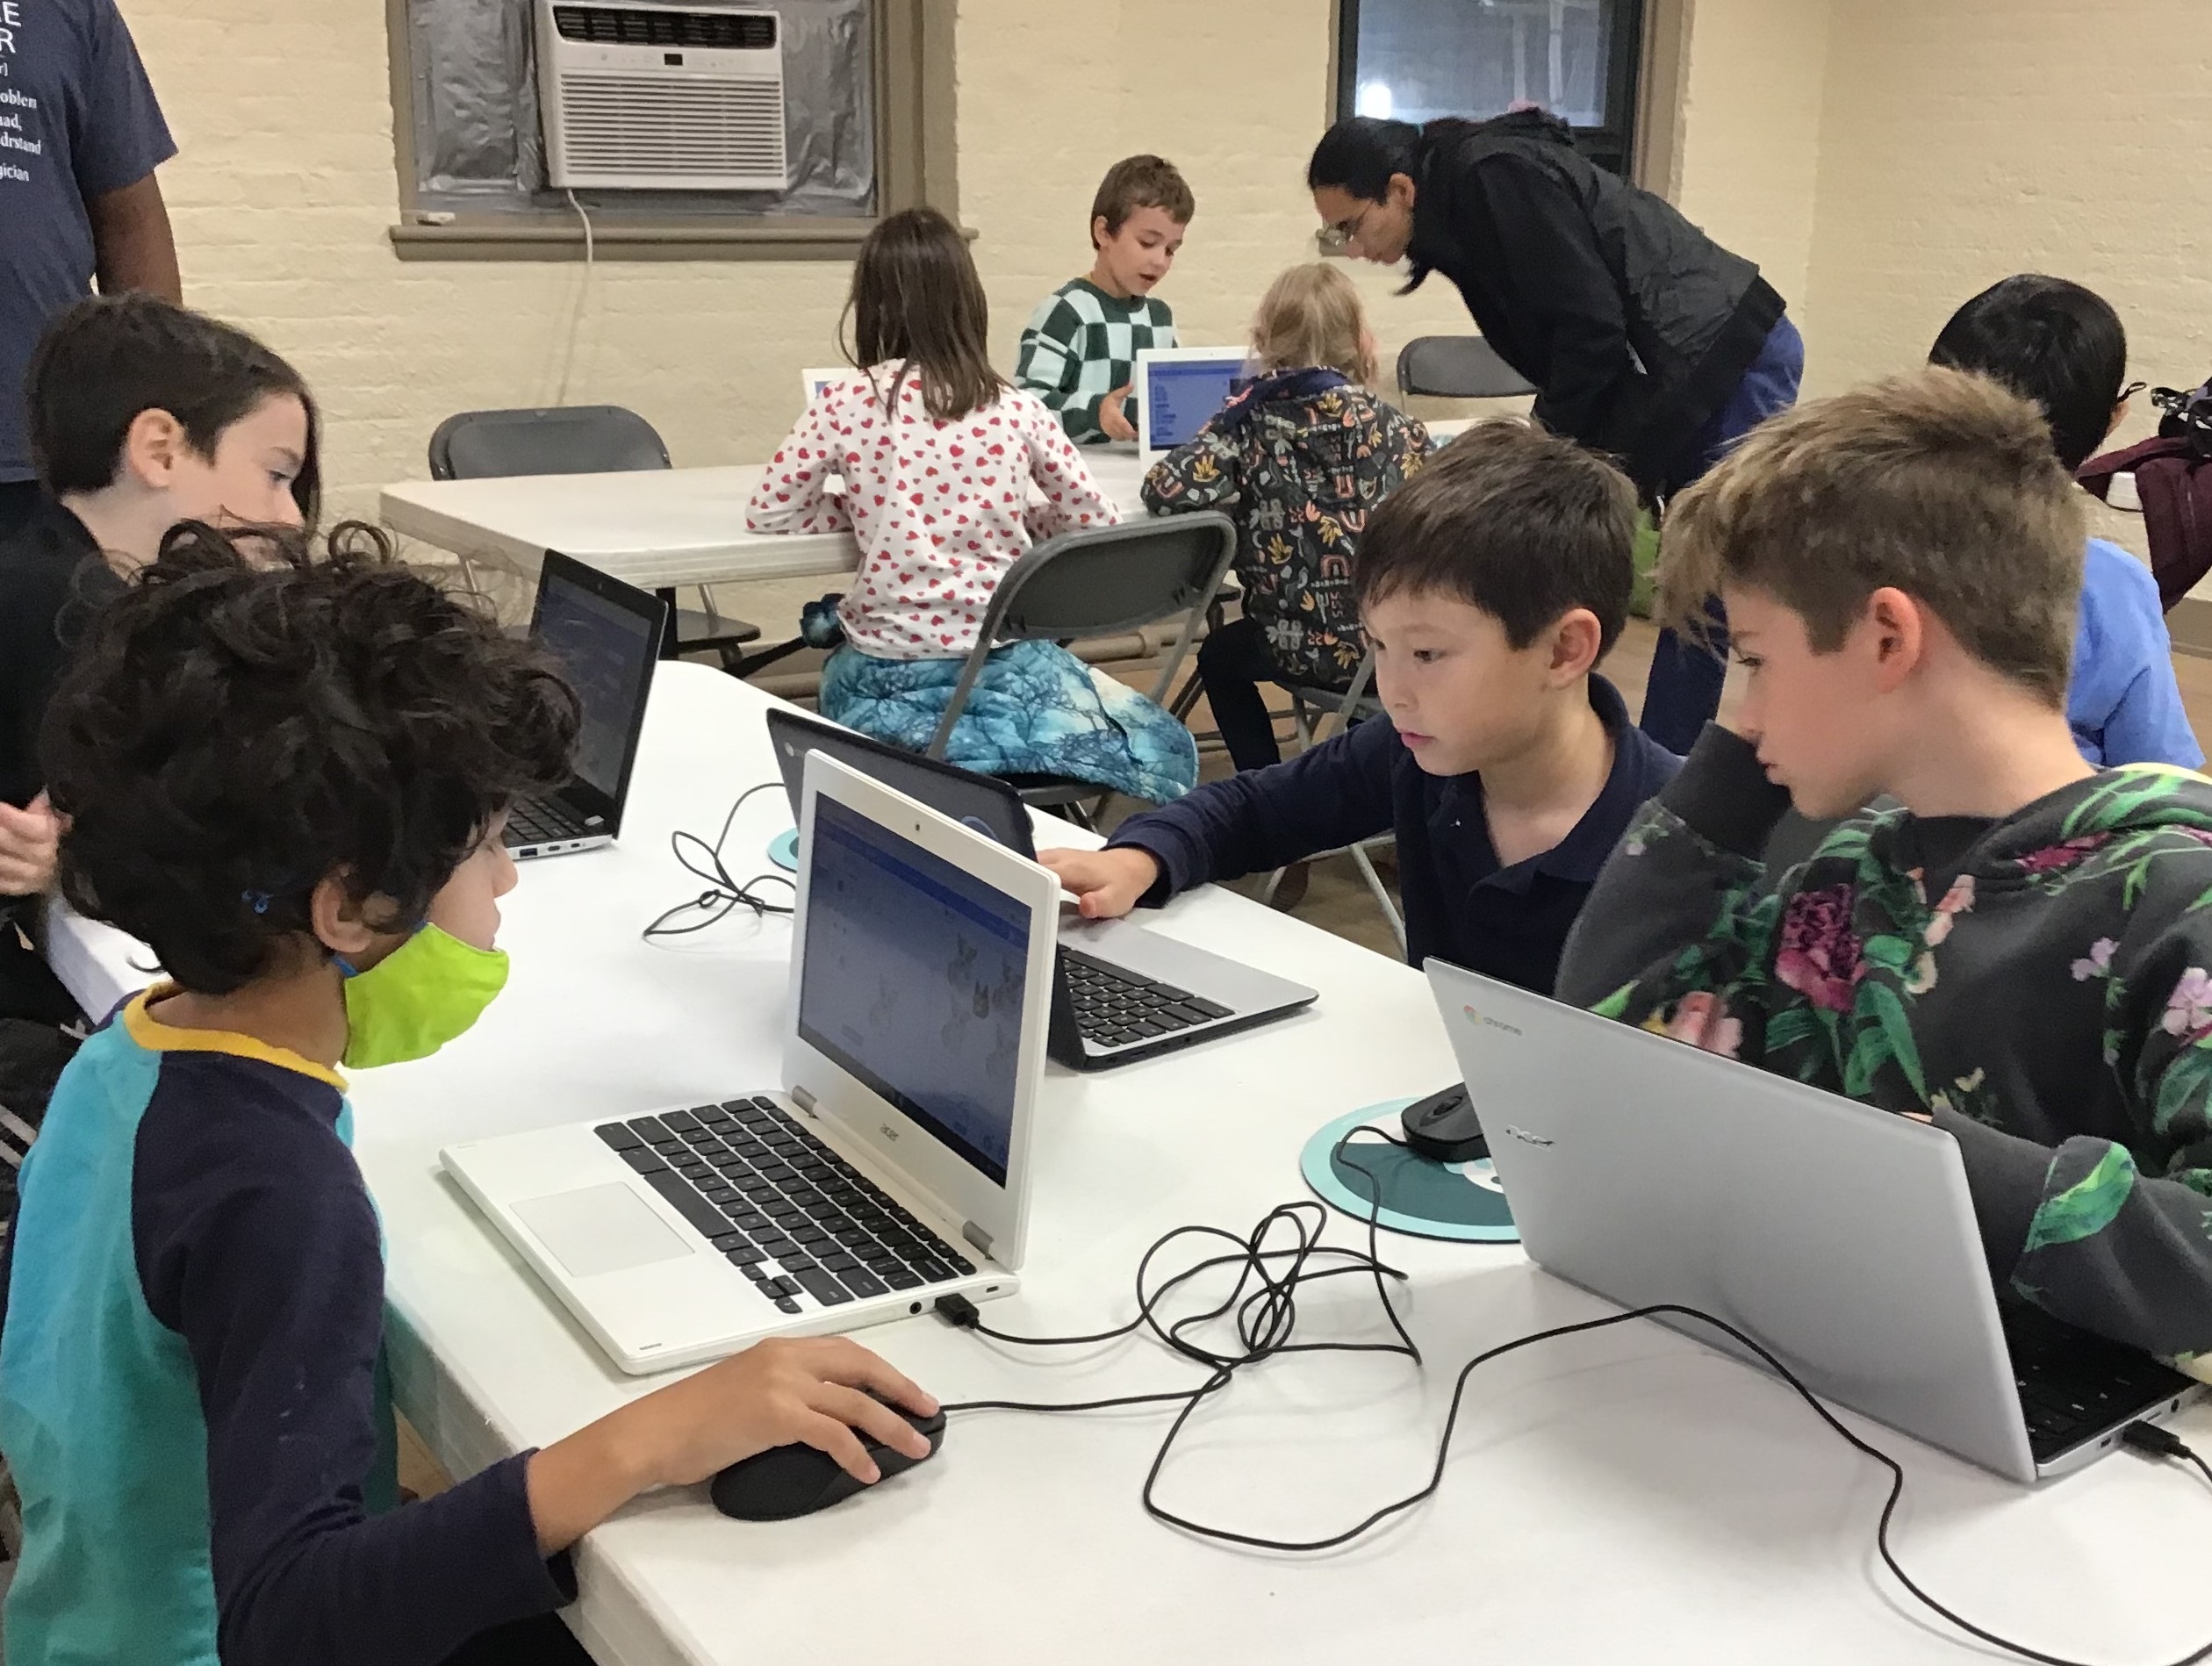 Students learning to code